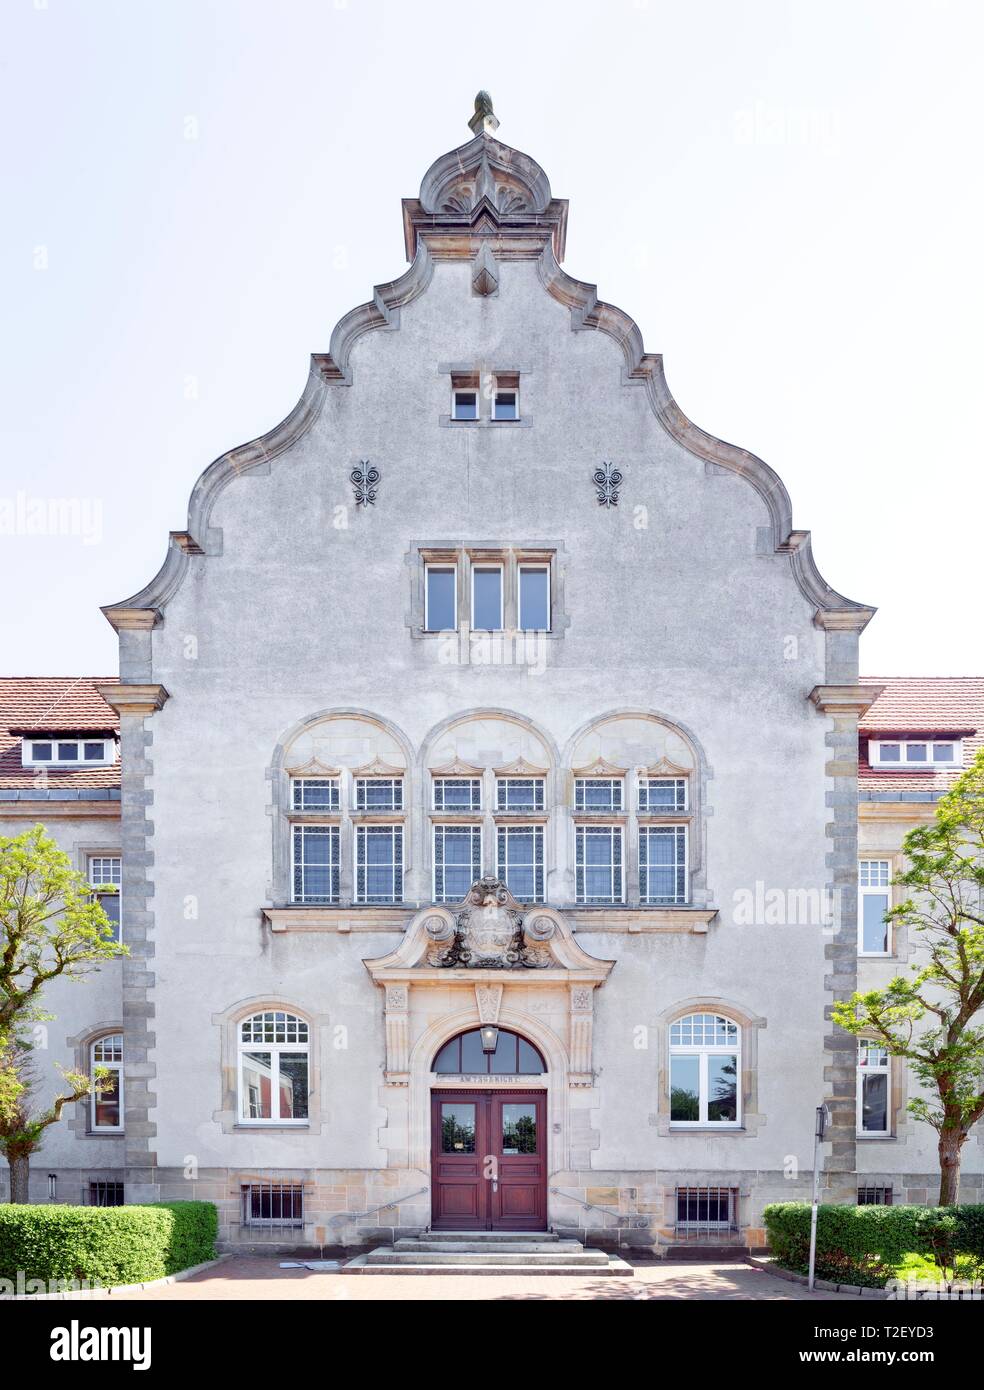 Local Court, Main Building, Itzehoe, Schleswig-Holstein, Germany Stock Photo